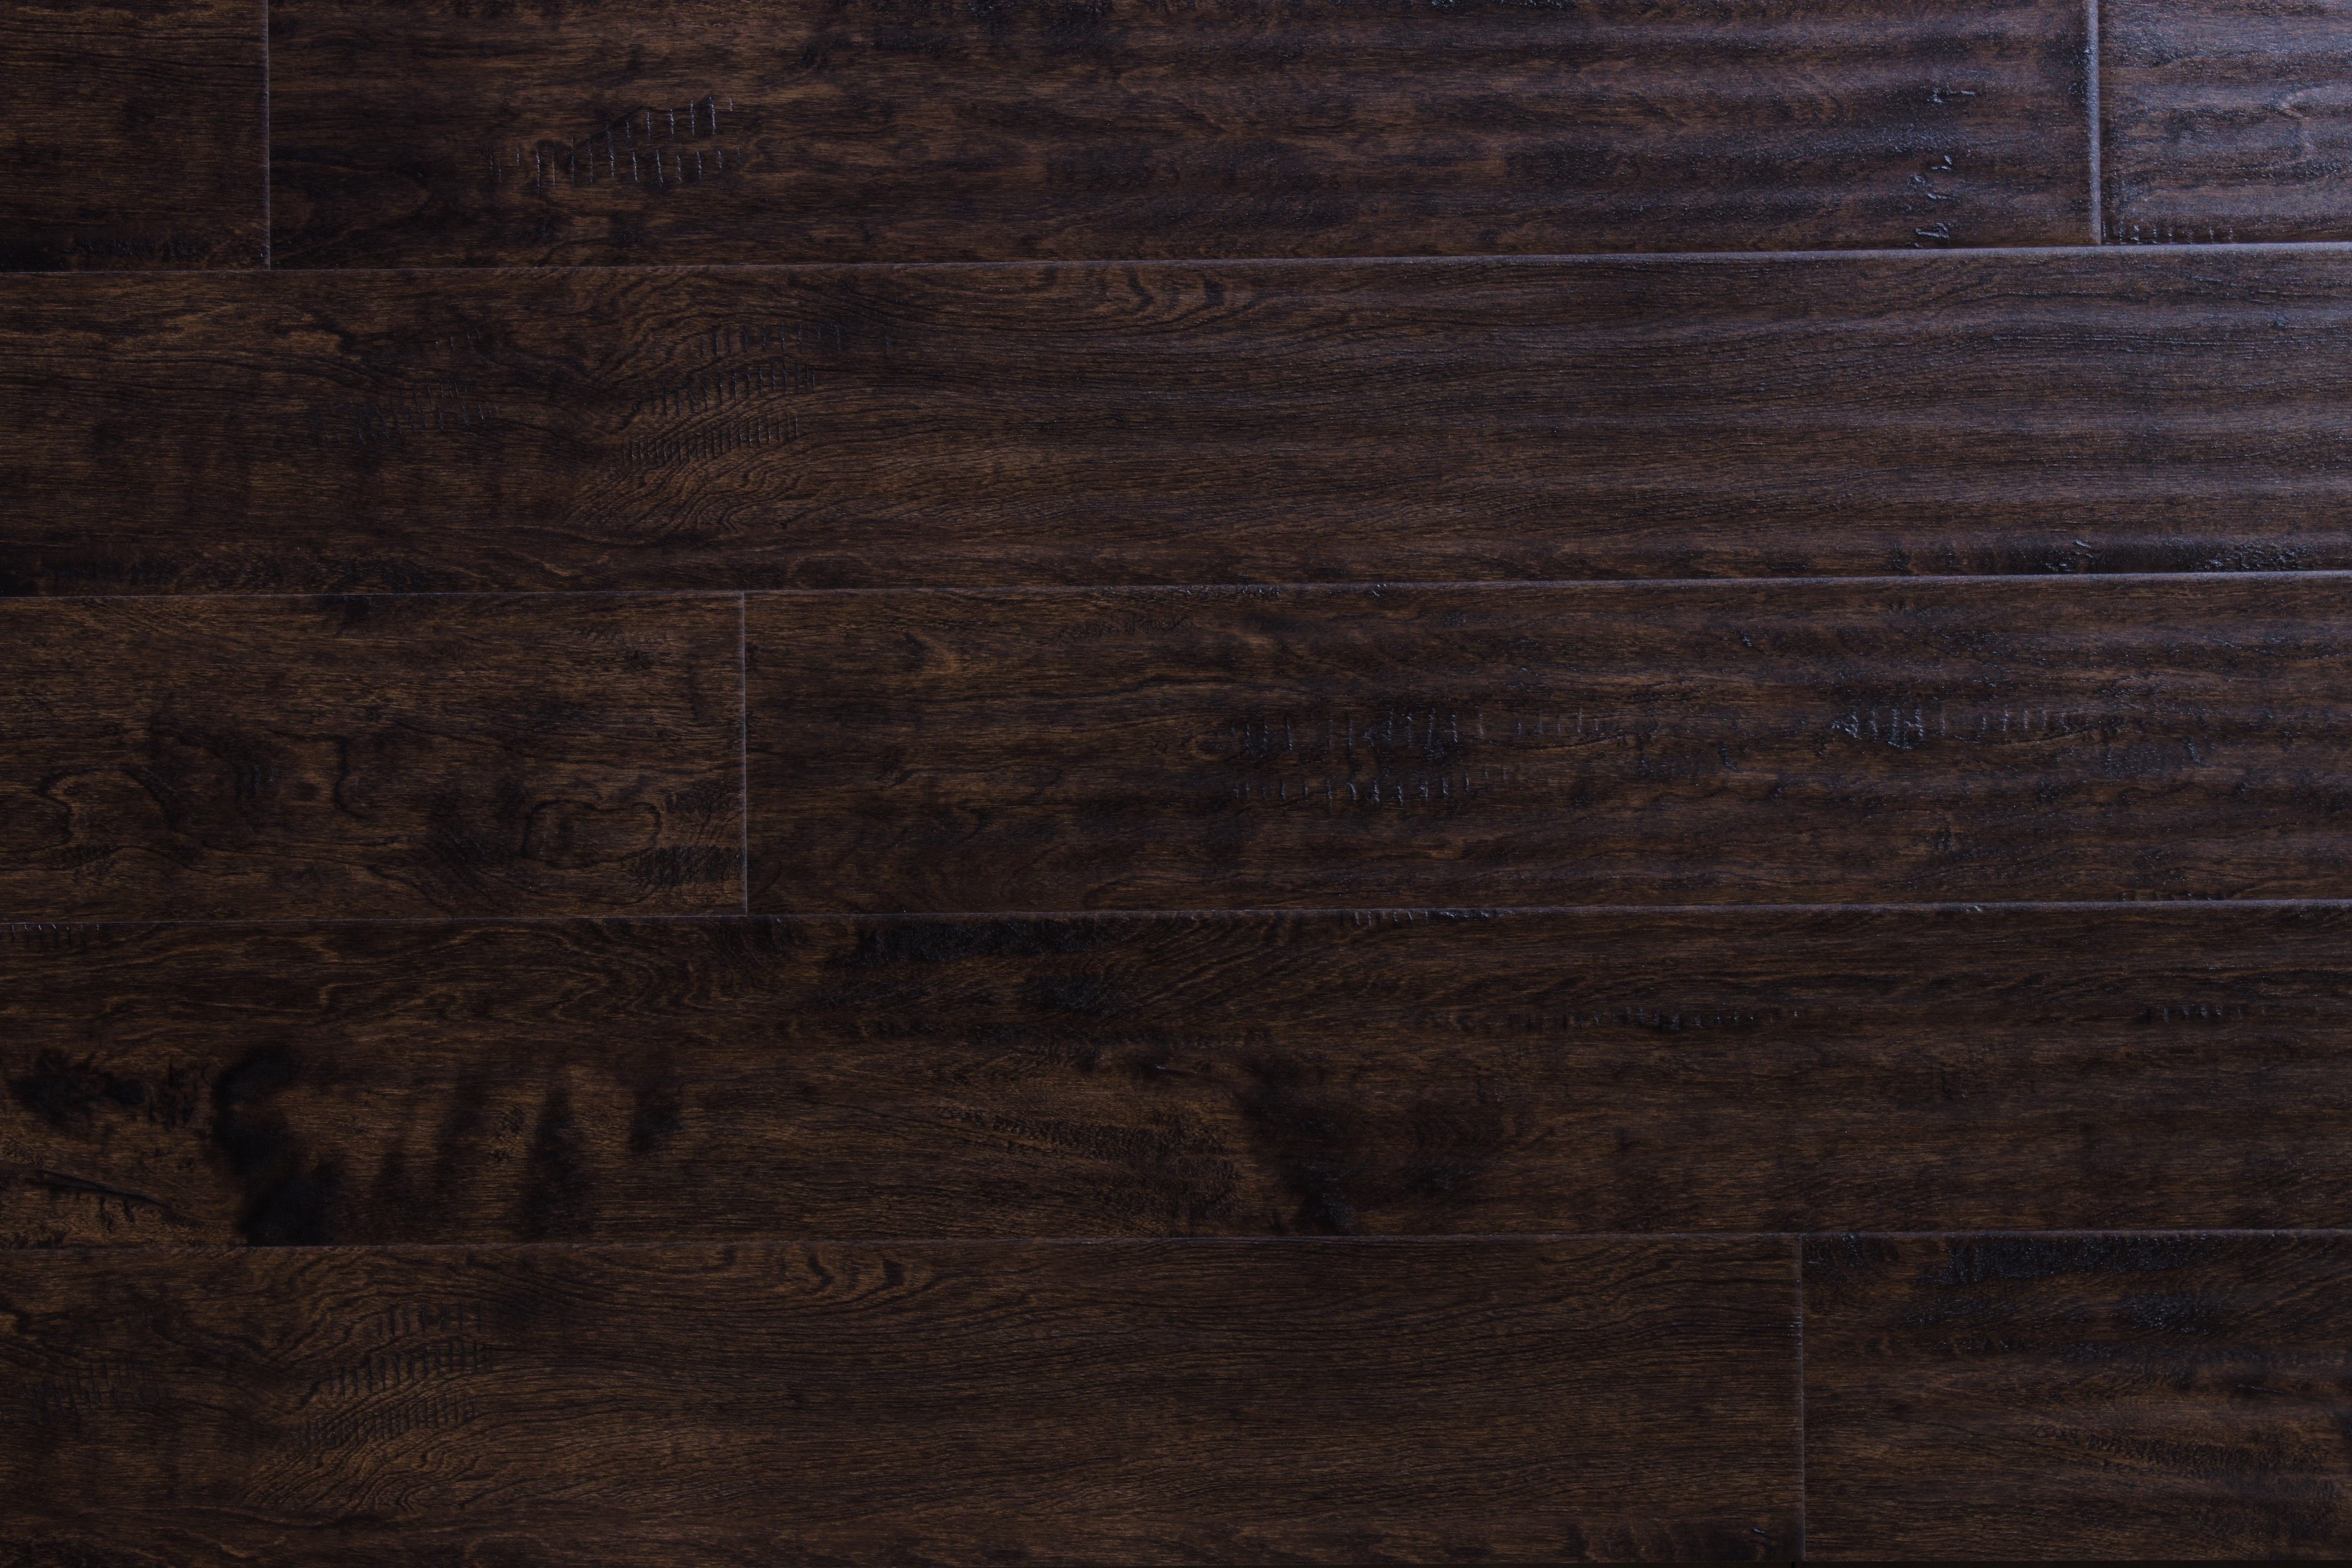 15 attractive Hardwood Floor Finish Options 2024 free download hardwood floor finish options of wood flooring free samples available at builddirecta in tailor multi gb 5874277bb8d3c